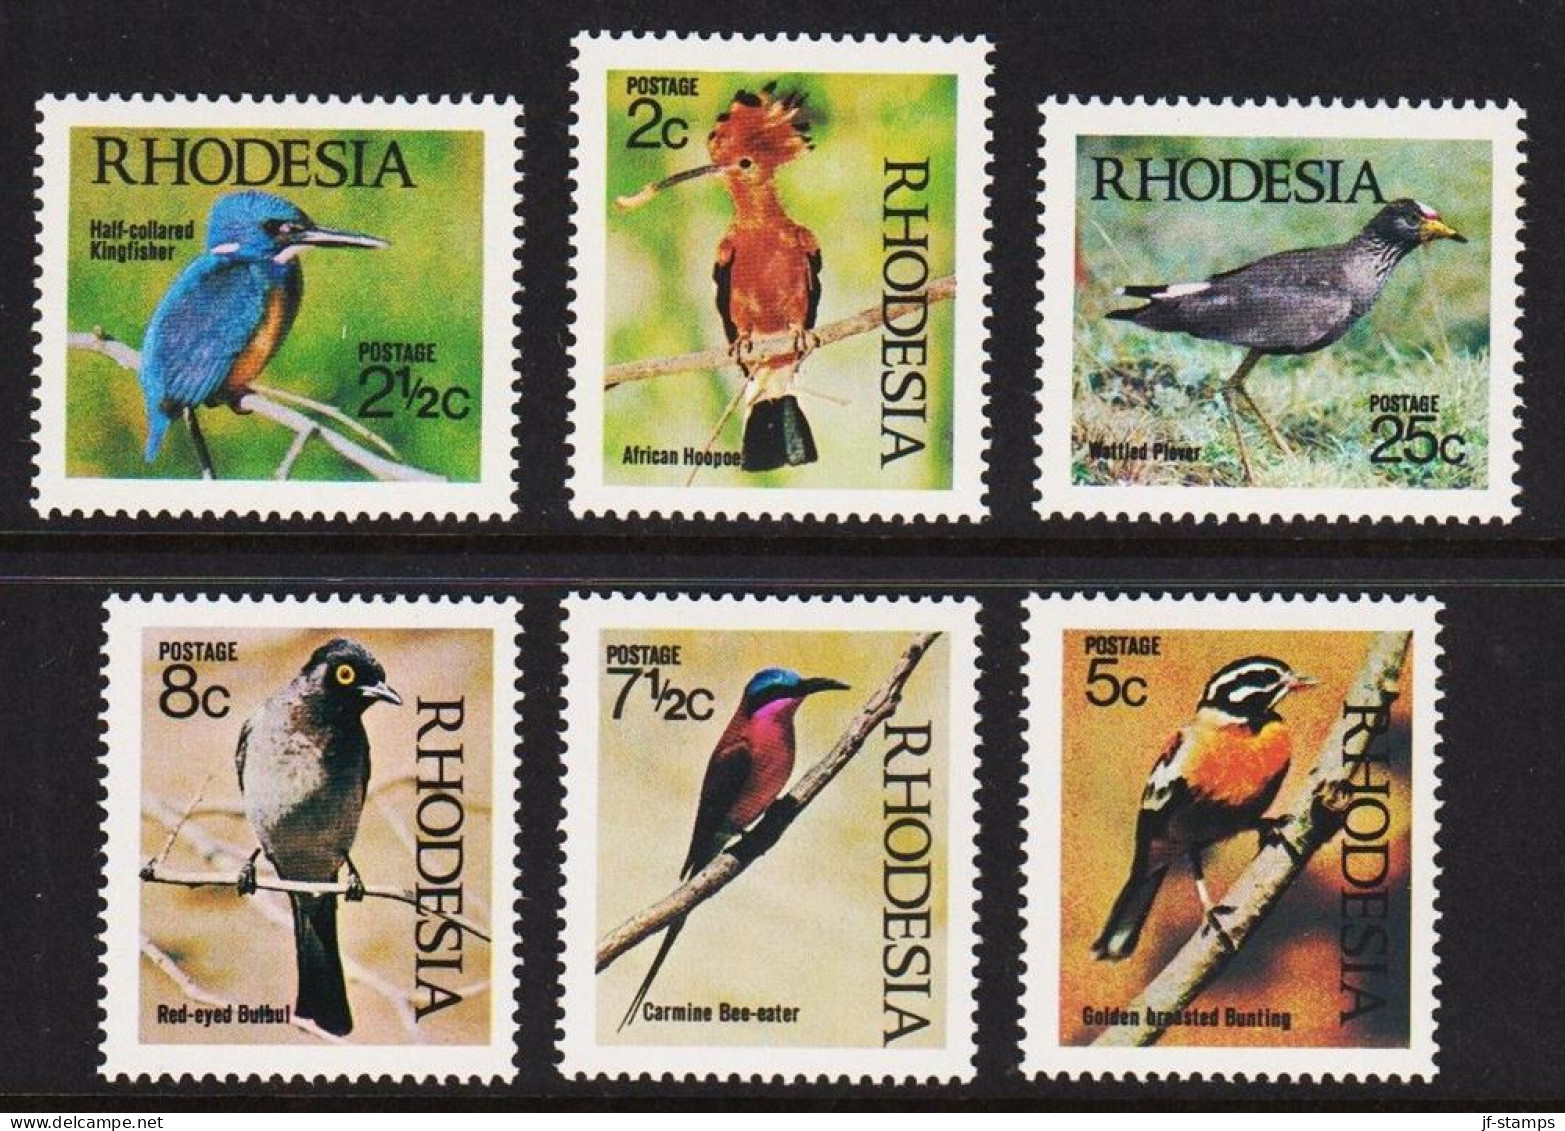 1971. RHODESIA. Birds Of Rhodesia. Complete Set With 6 Stamps Never Hinged. (Michel 108-113) - JF545305 - Rhodesien (1964-1980)